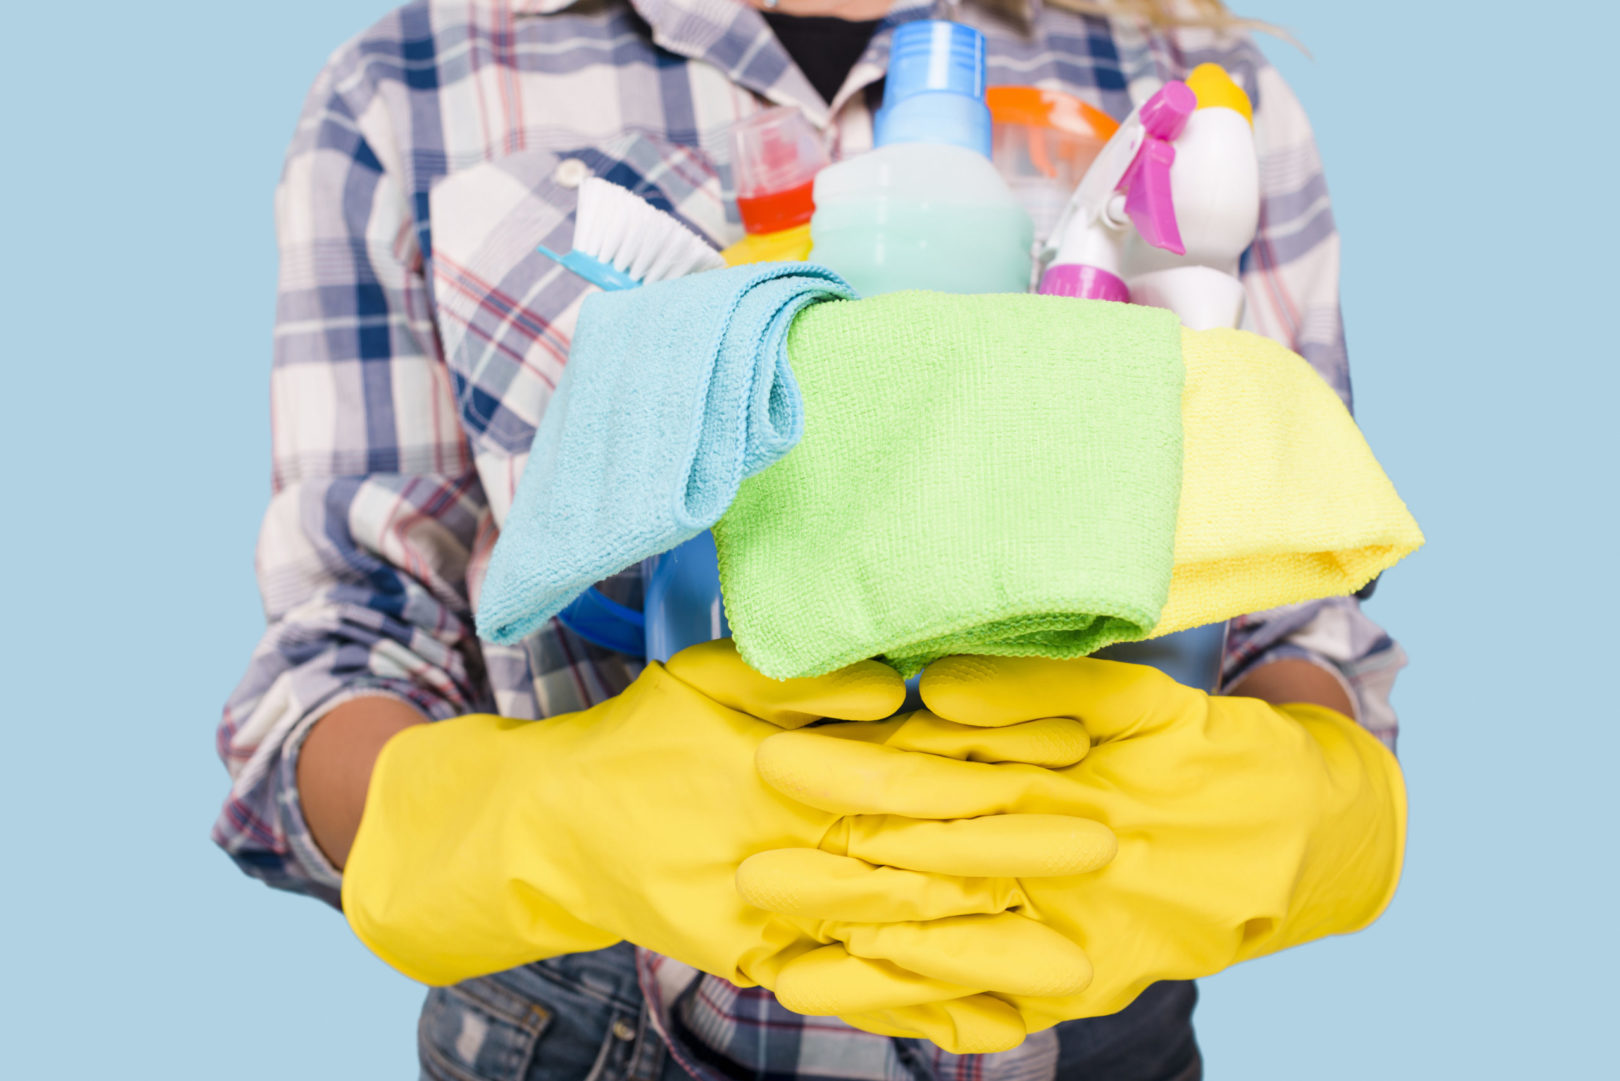 mid-section-cleaner-holding-bucket-with-cleaning-products-wearing-yellow-gloves